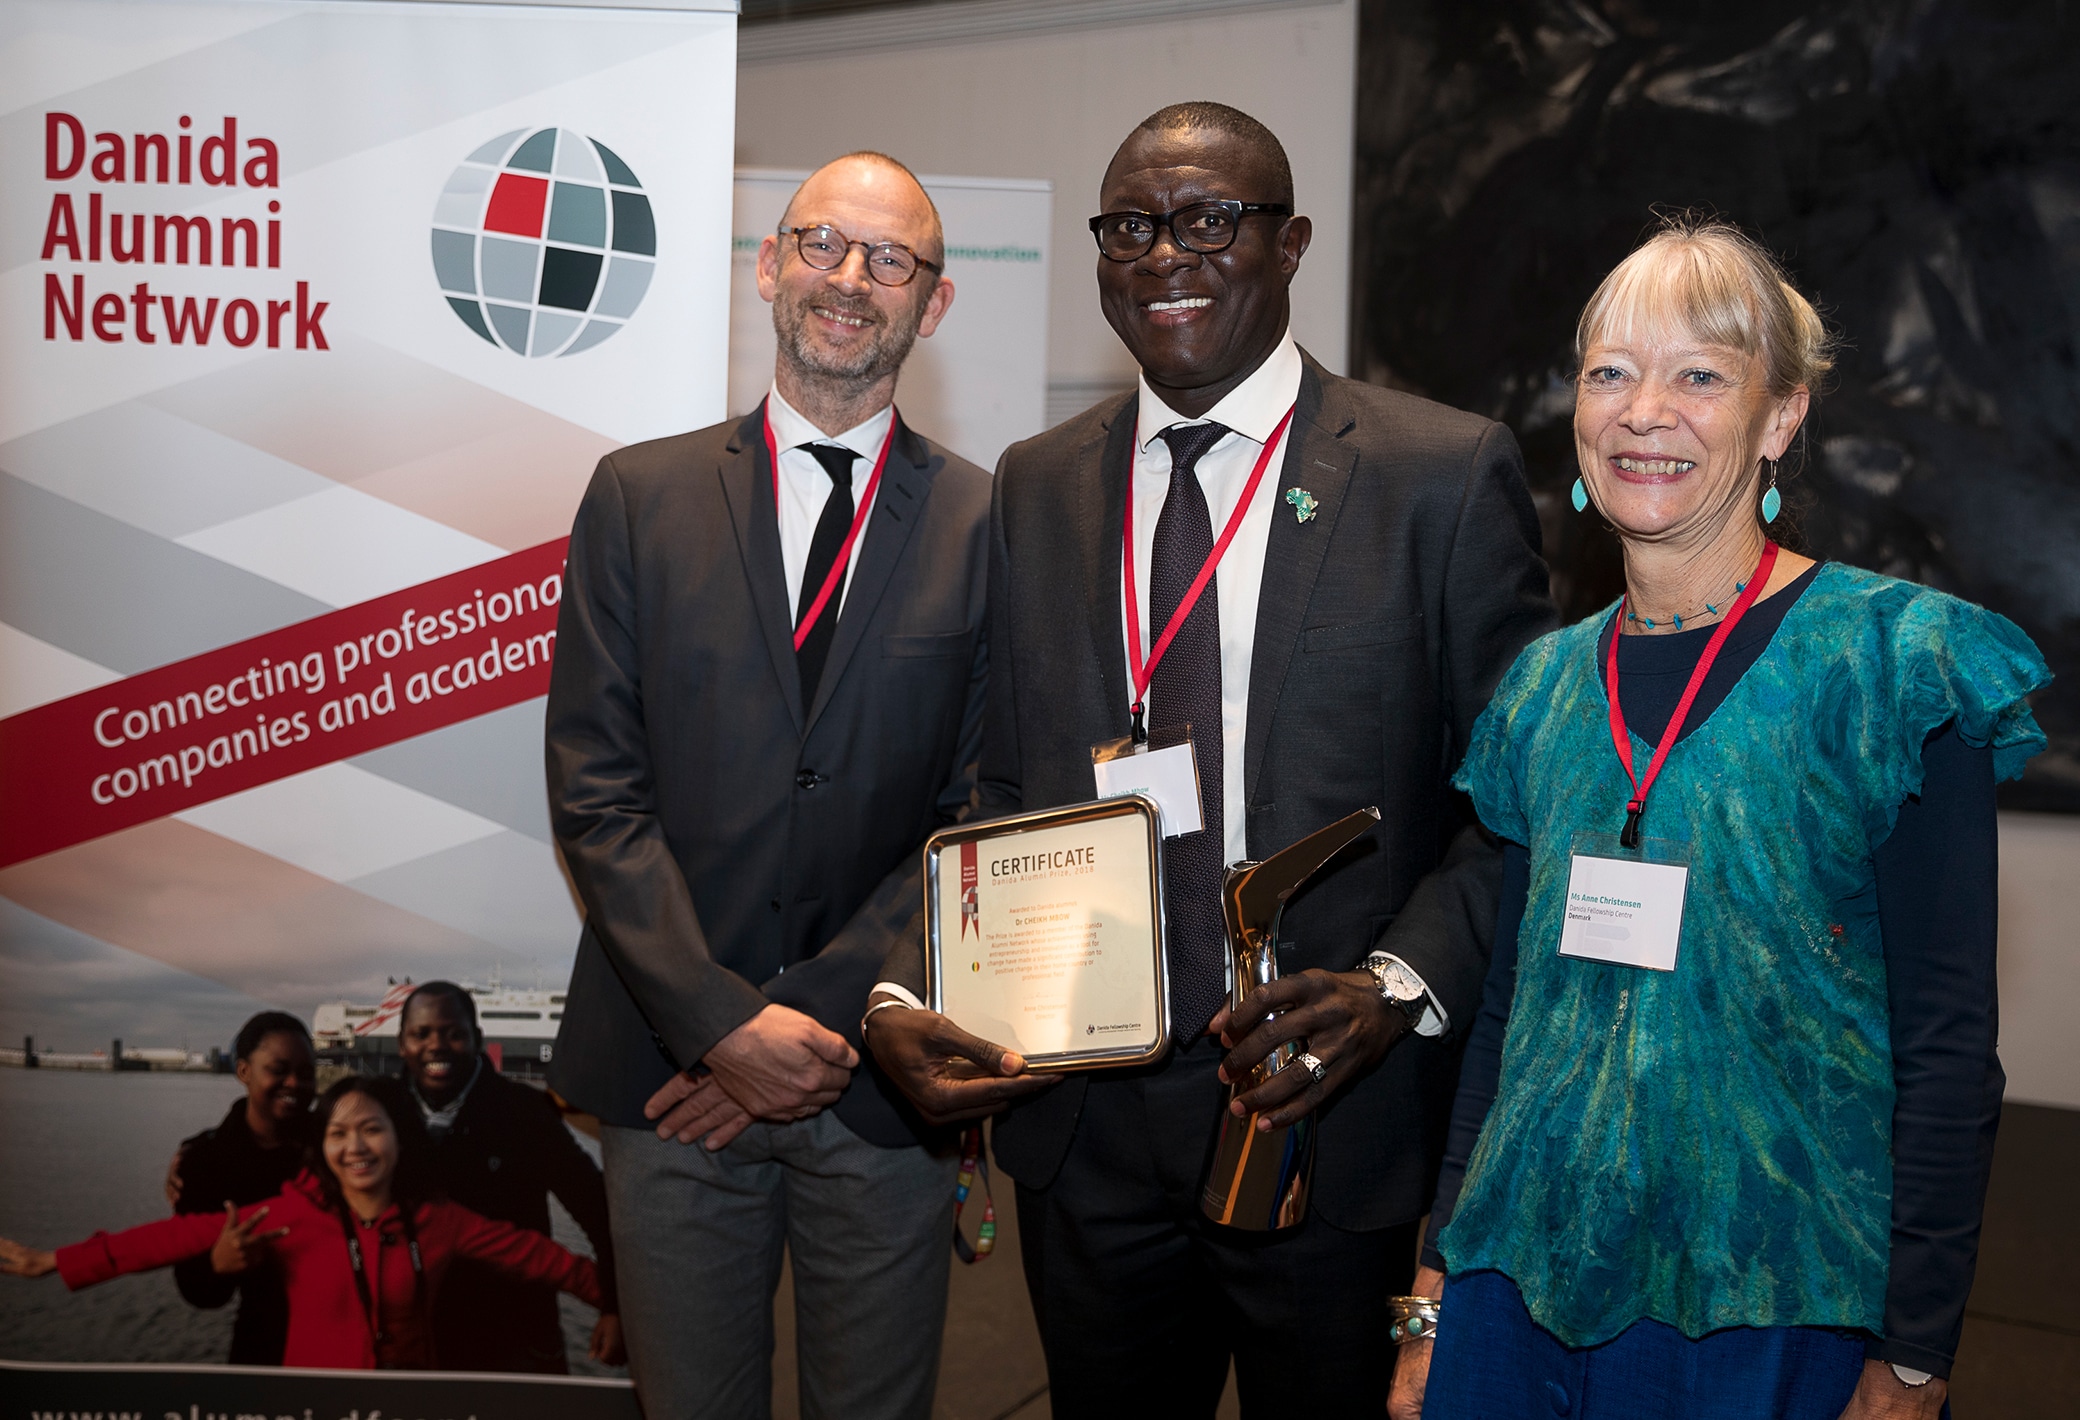 Martin Bille Hermann, State Secretary for Development Policy, the Ministry of Foreign Affairs of Denmark, and Anne Christensen, Danida Fellowship Centre, presented the 2018 prize at the award ceremony in Copenhagen on 8 November.